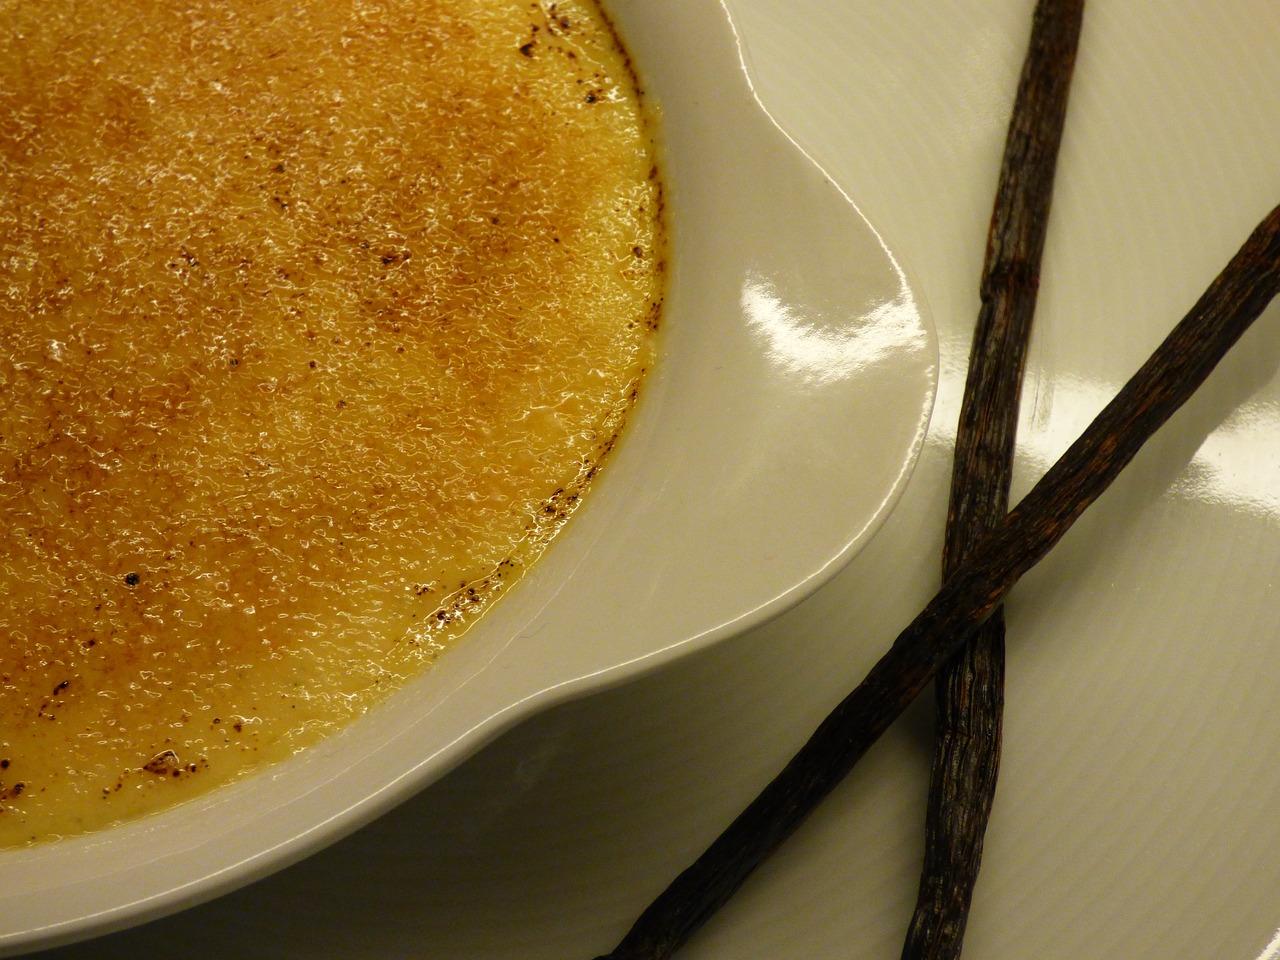 creme brulee co to jest